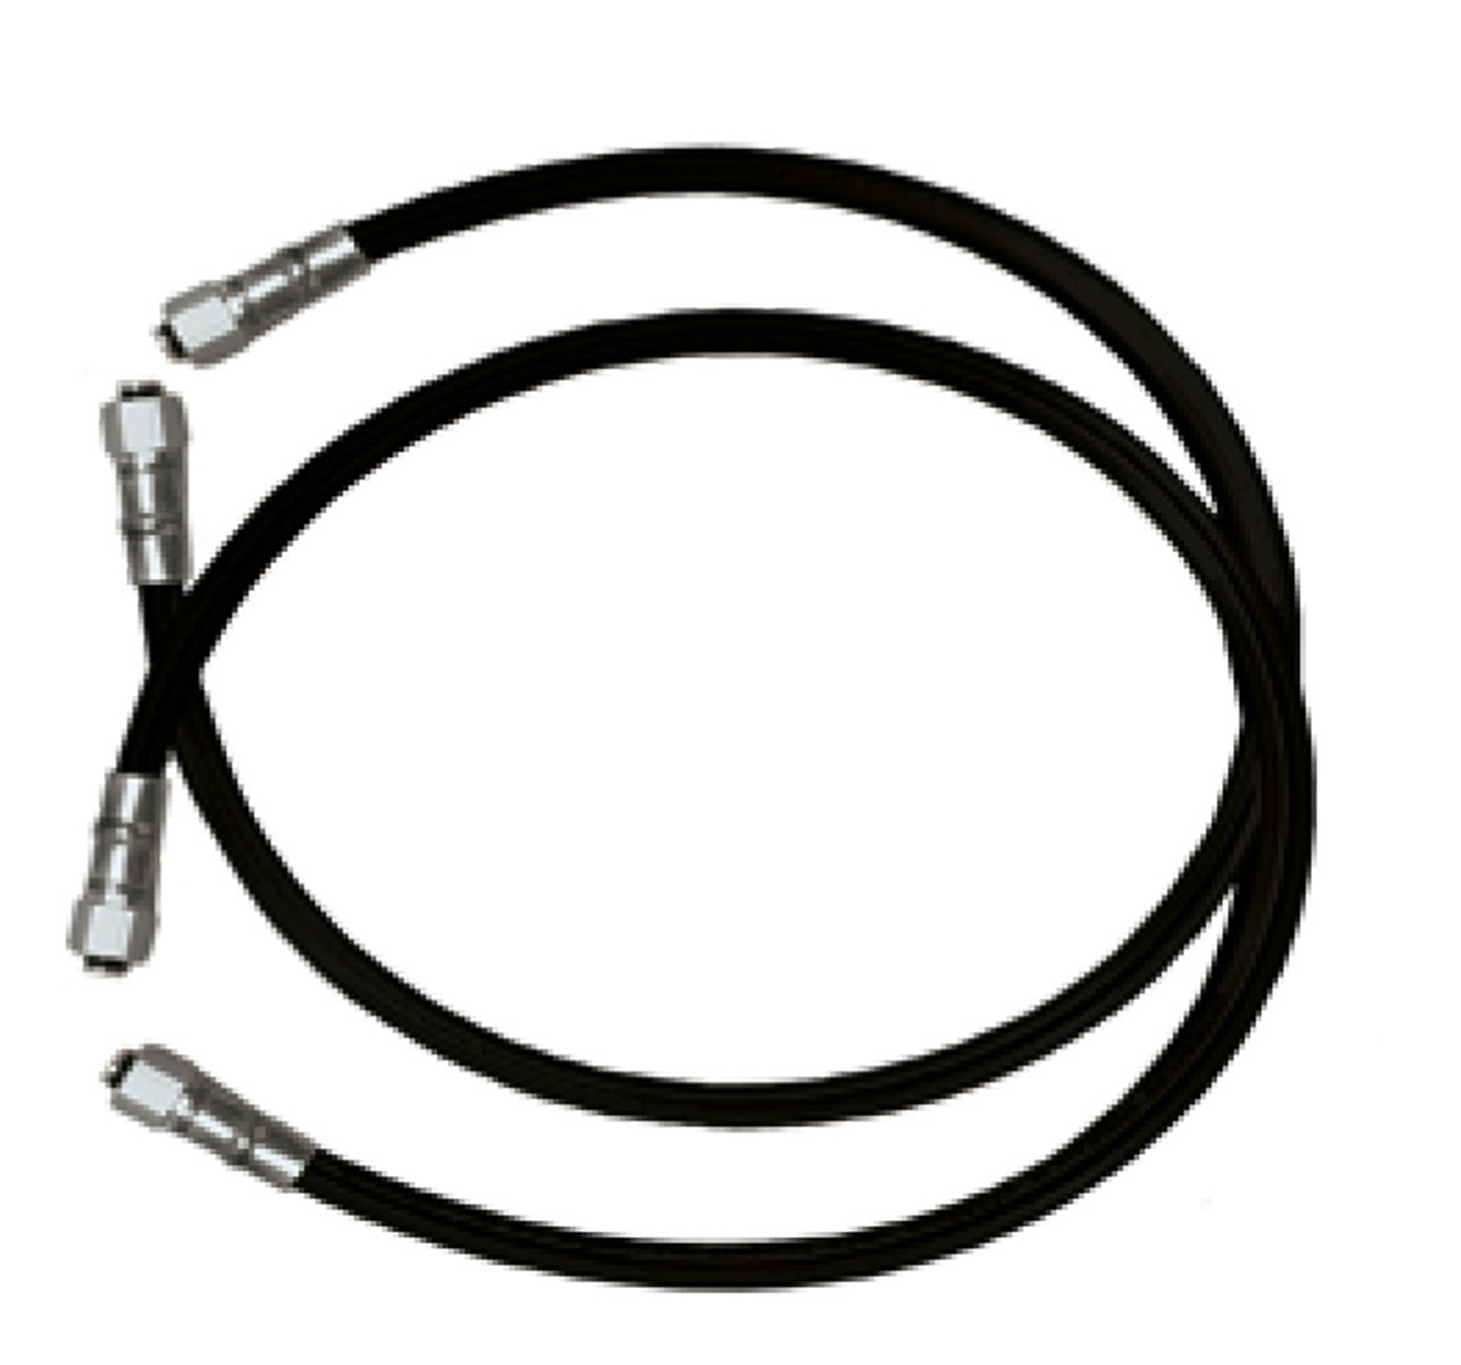 KITOB130-29IN Dual Cylinder/Dual Engine Connection Kit 18" Hoses